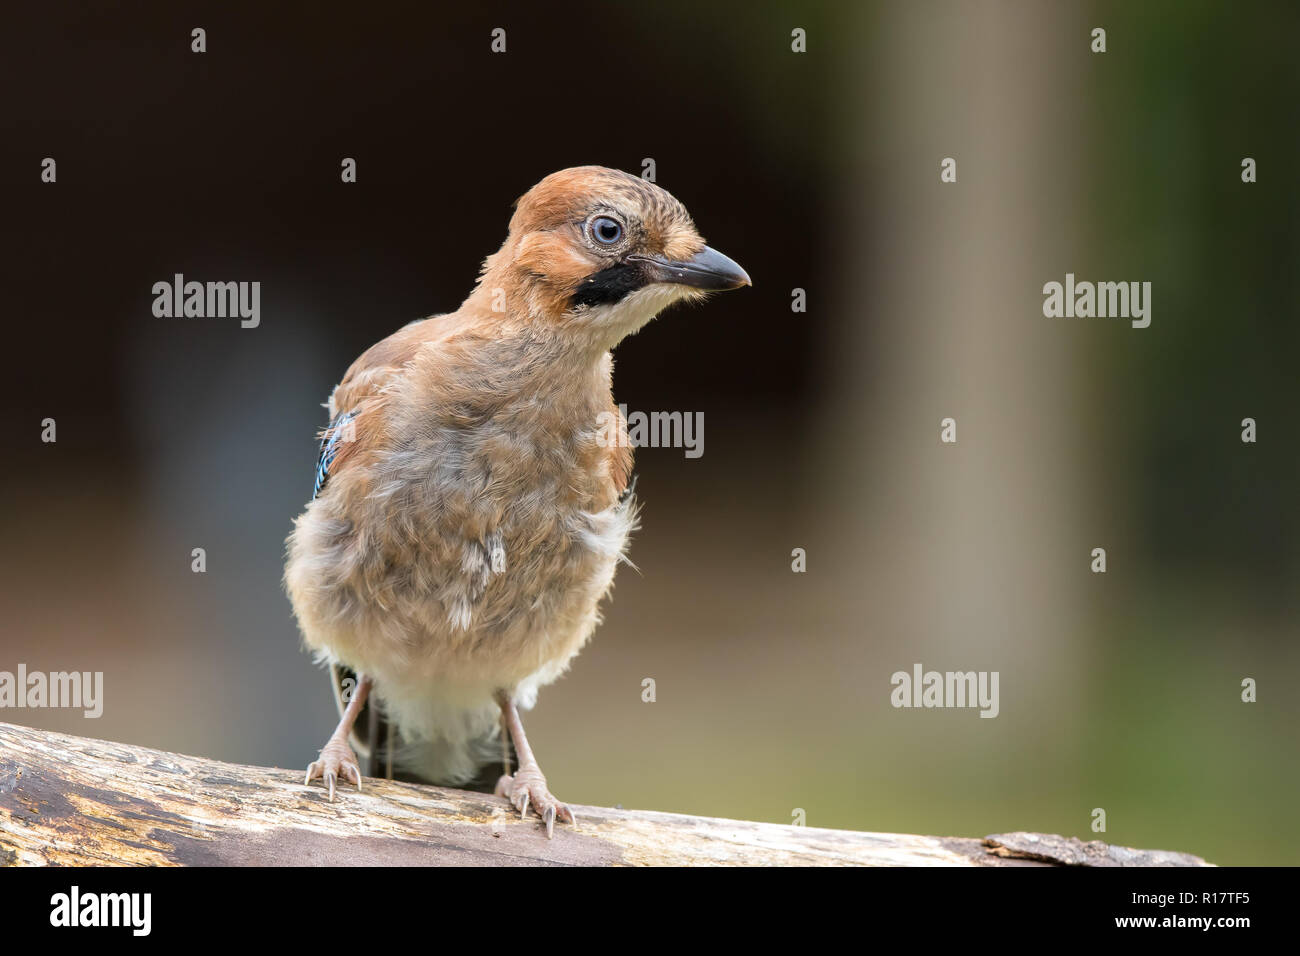 Close, front view of wild, downy, juvenile UK jay bird (Garrulus glandarius) isolated, perched on log in outdoor natural summer setting. Stock Photo